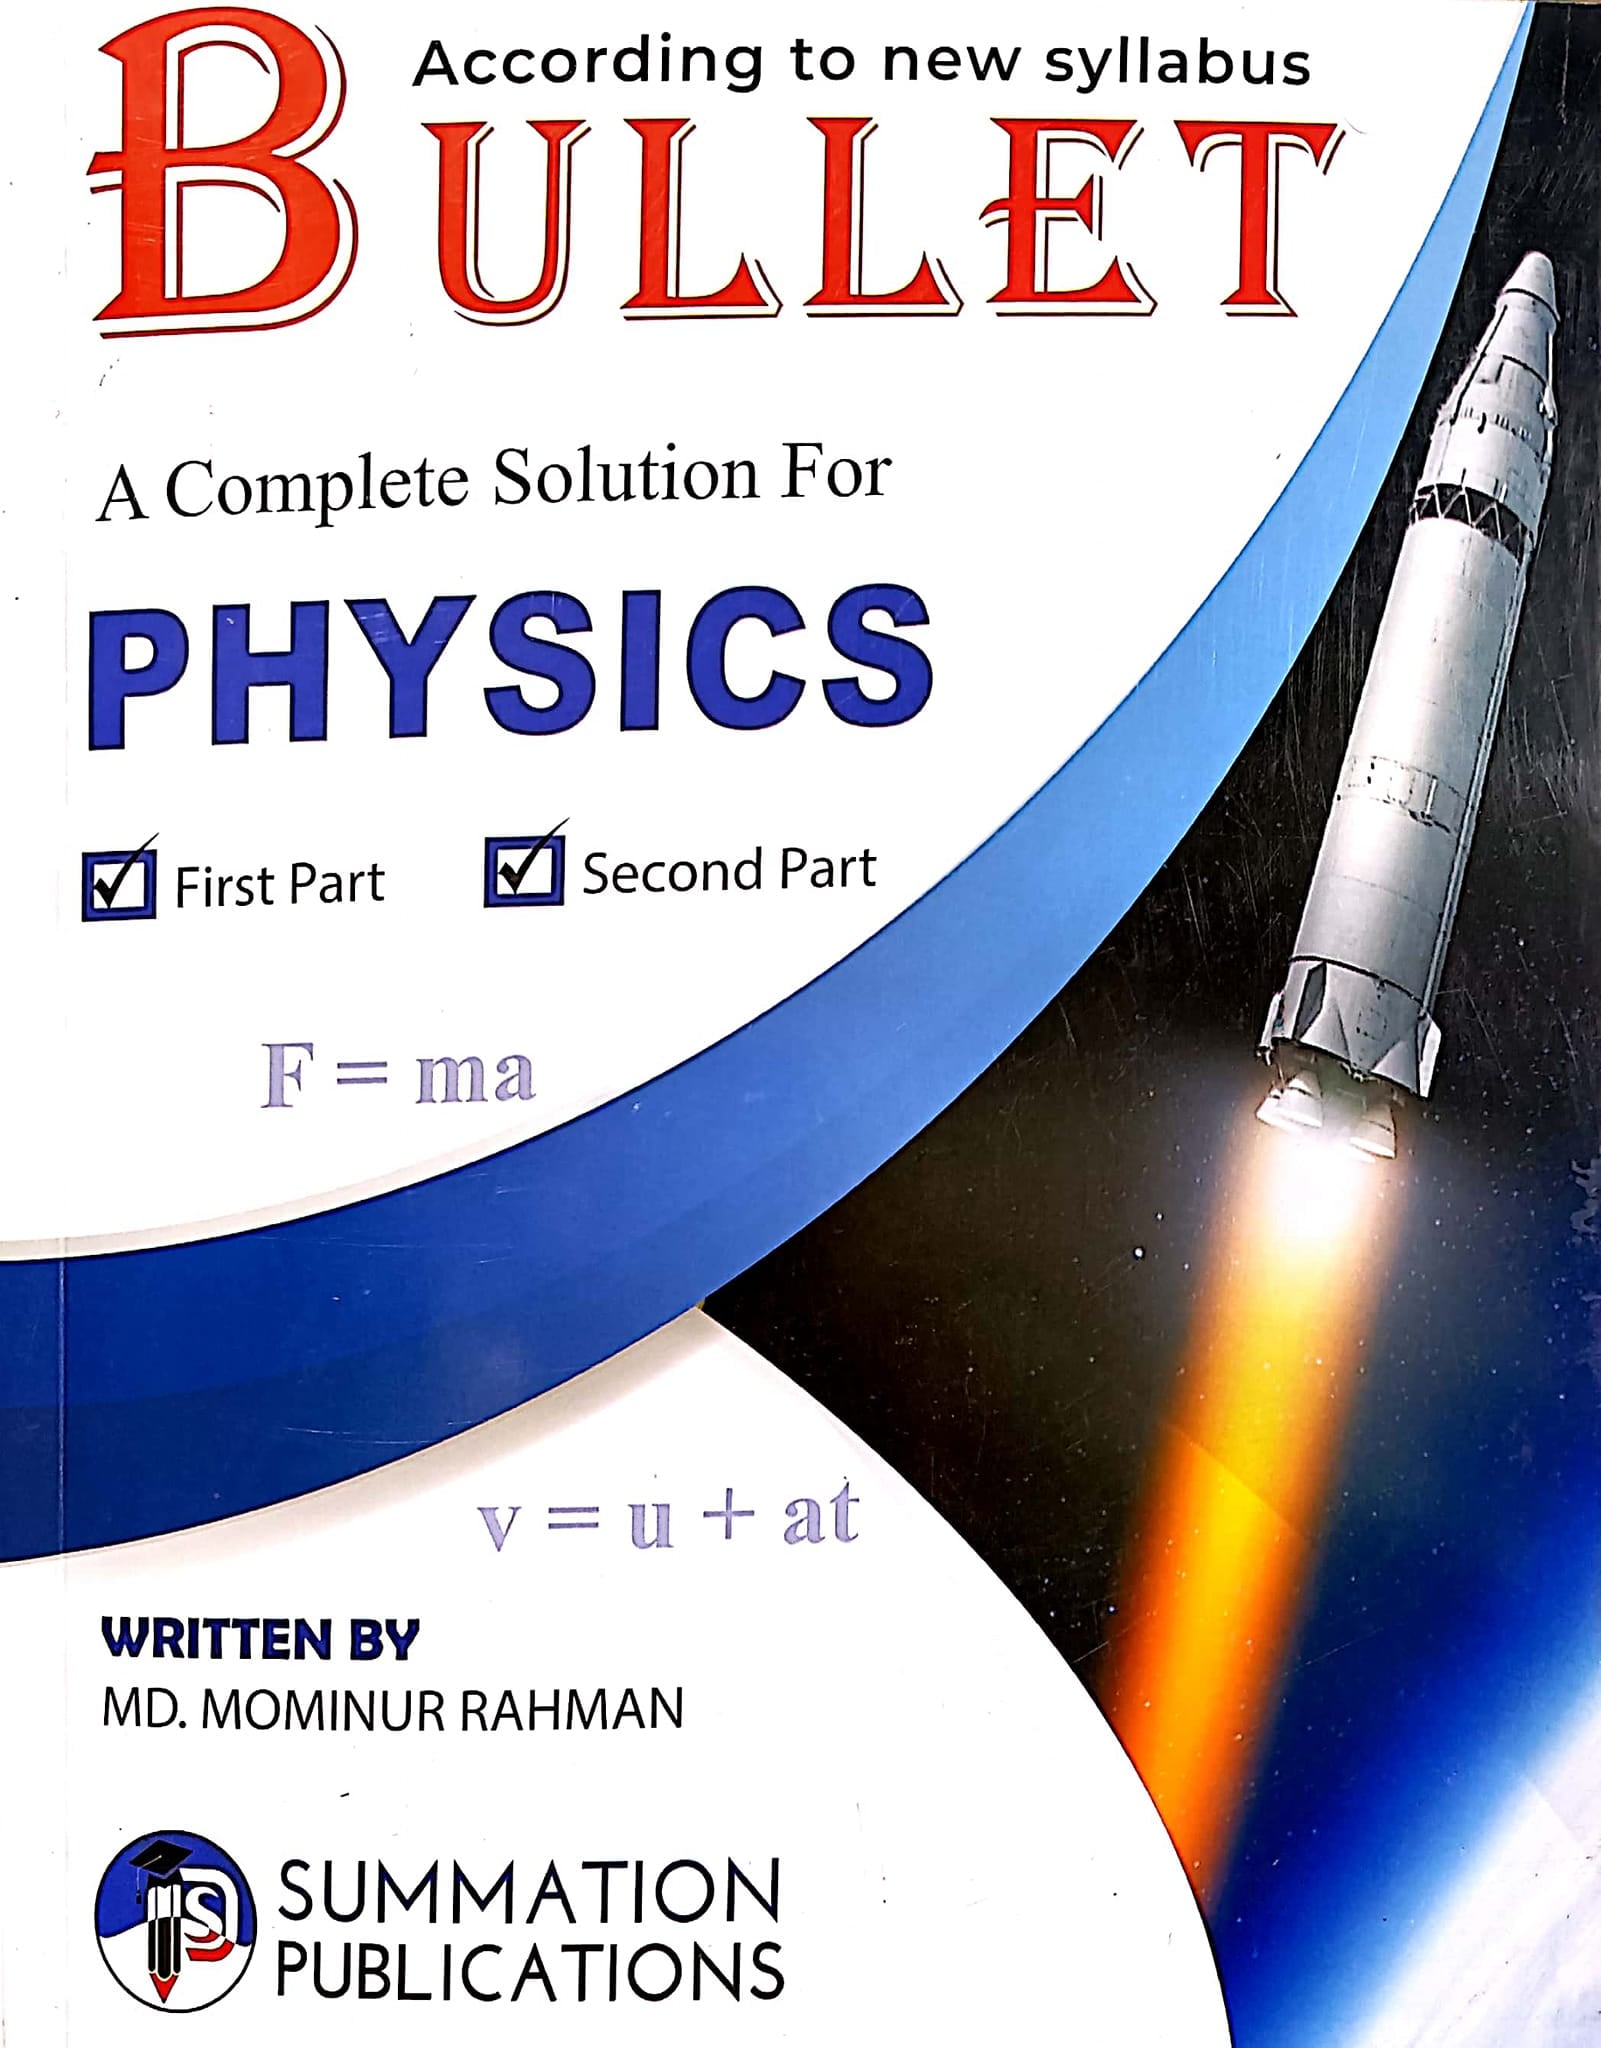 Bullet A Complete Solution for Physics